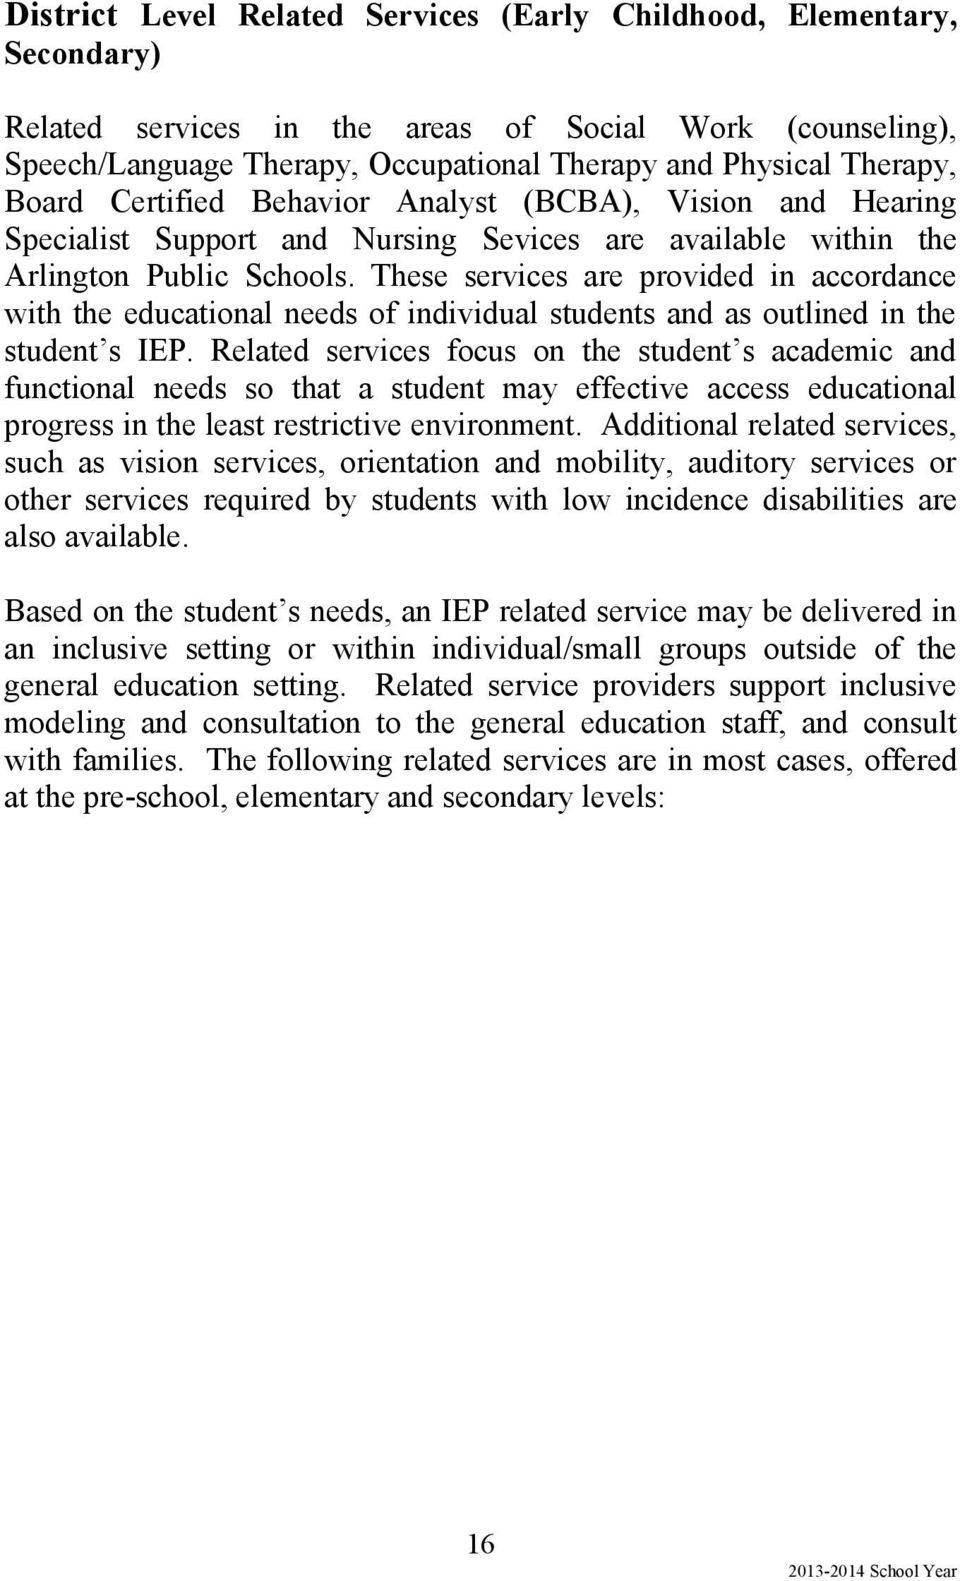 These services are provided in accordance with the educational needs of individual students and as outlined in the student s IEP.